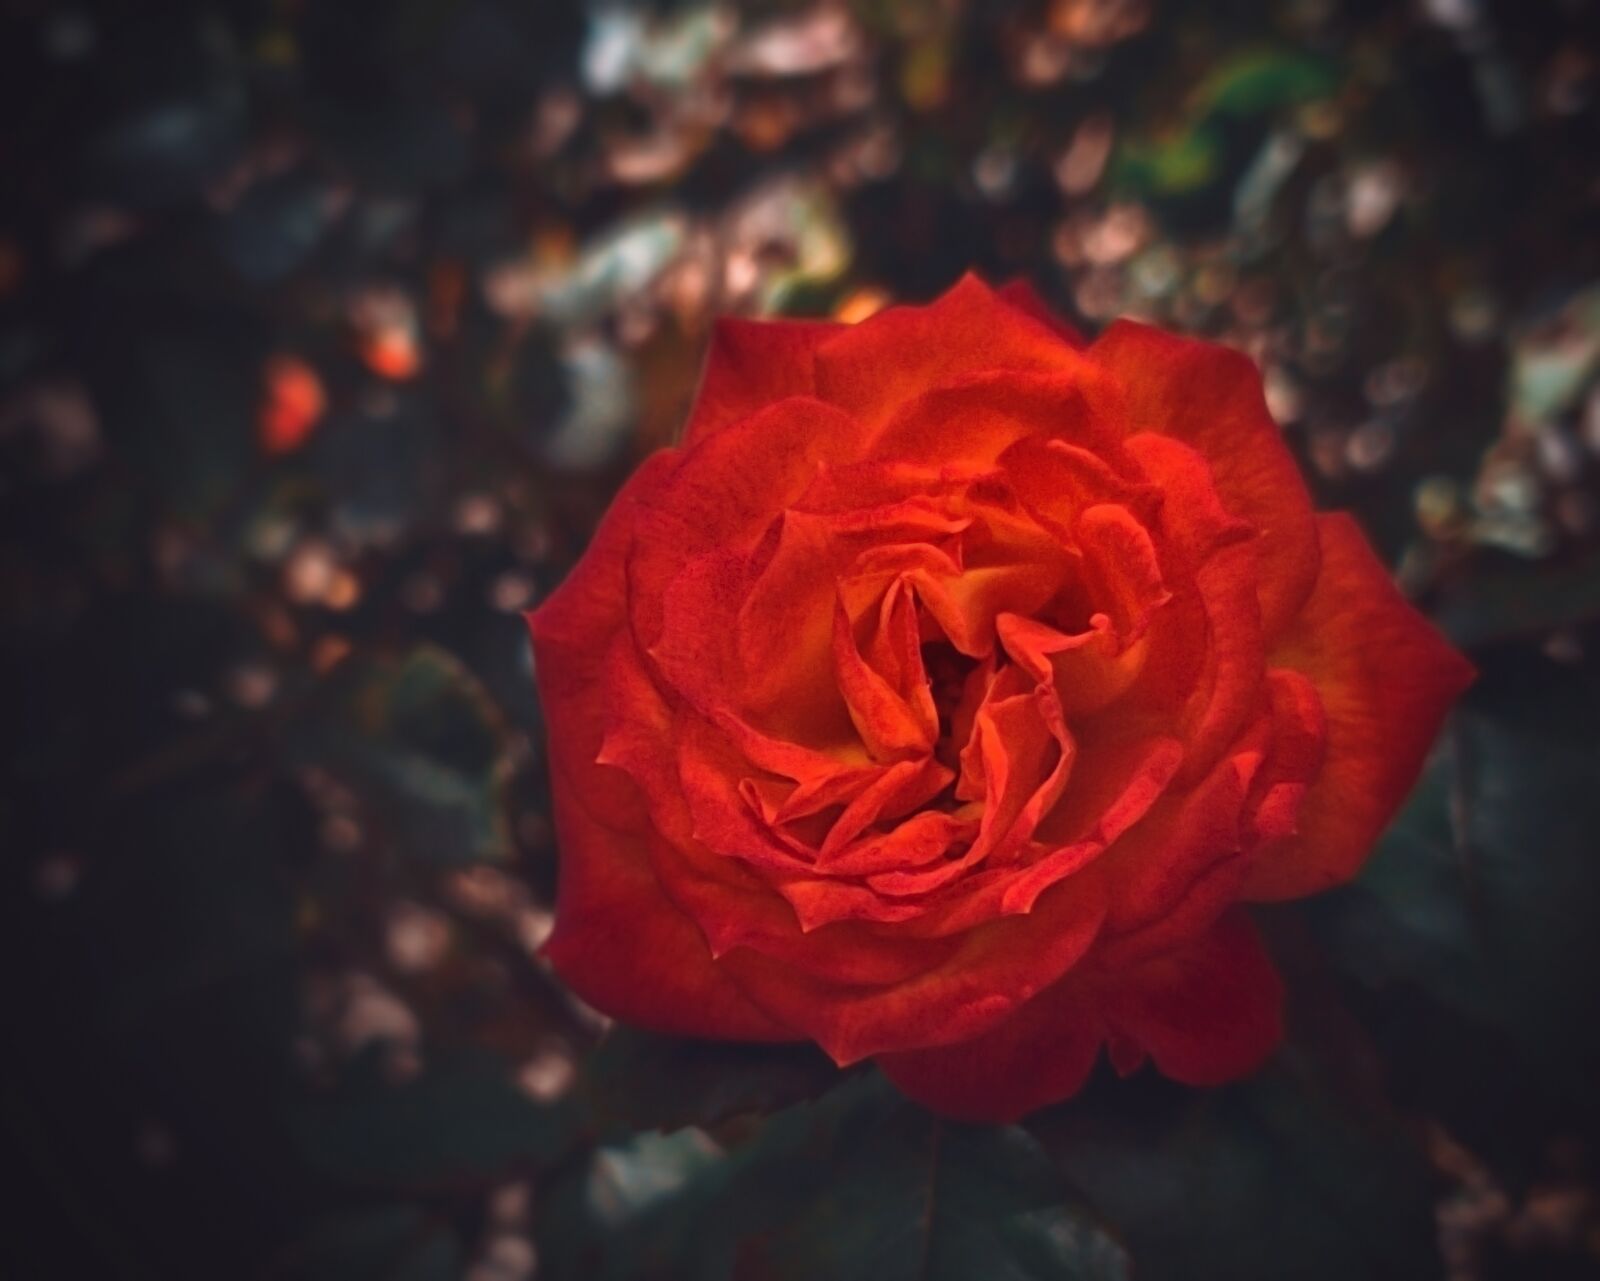 Samsung Galaxy S10+ sample photo. Rose, flower, nature photography